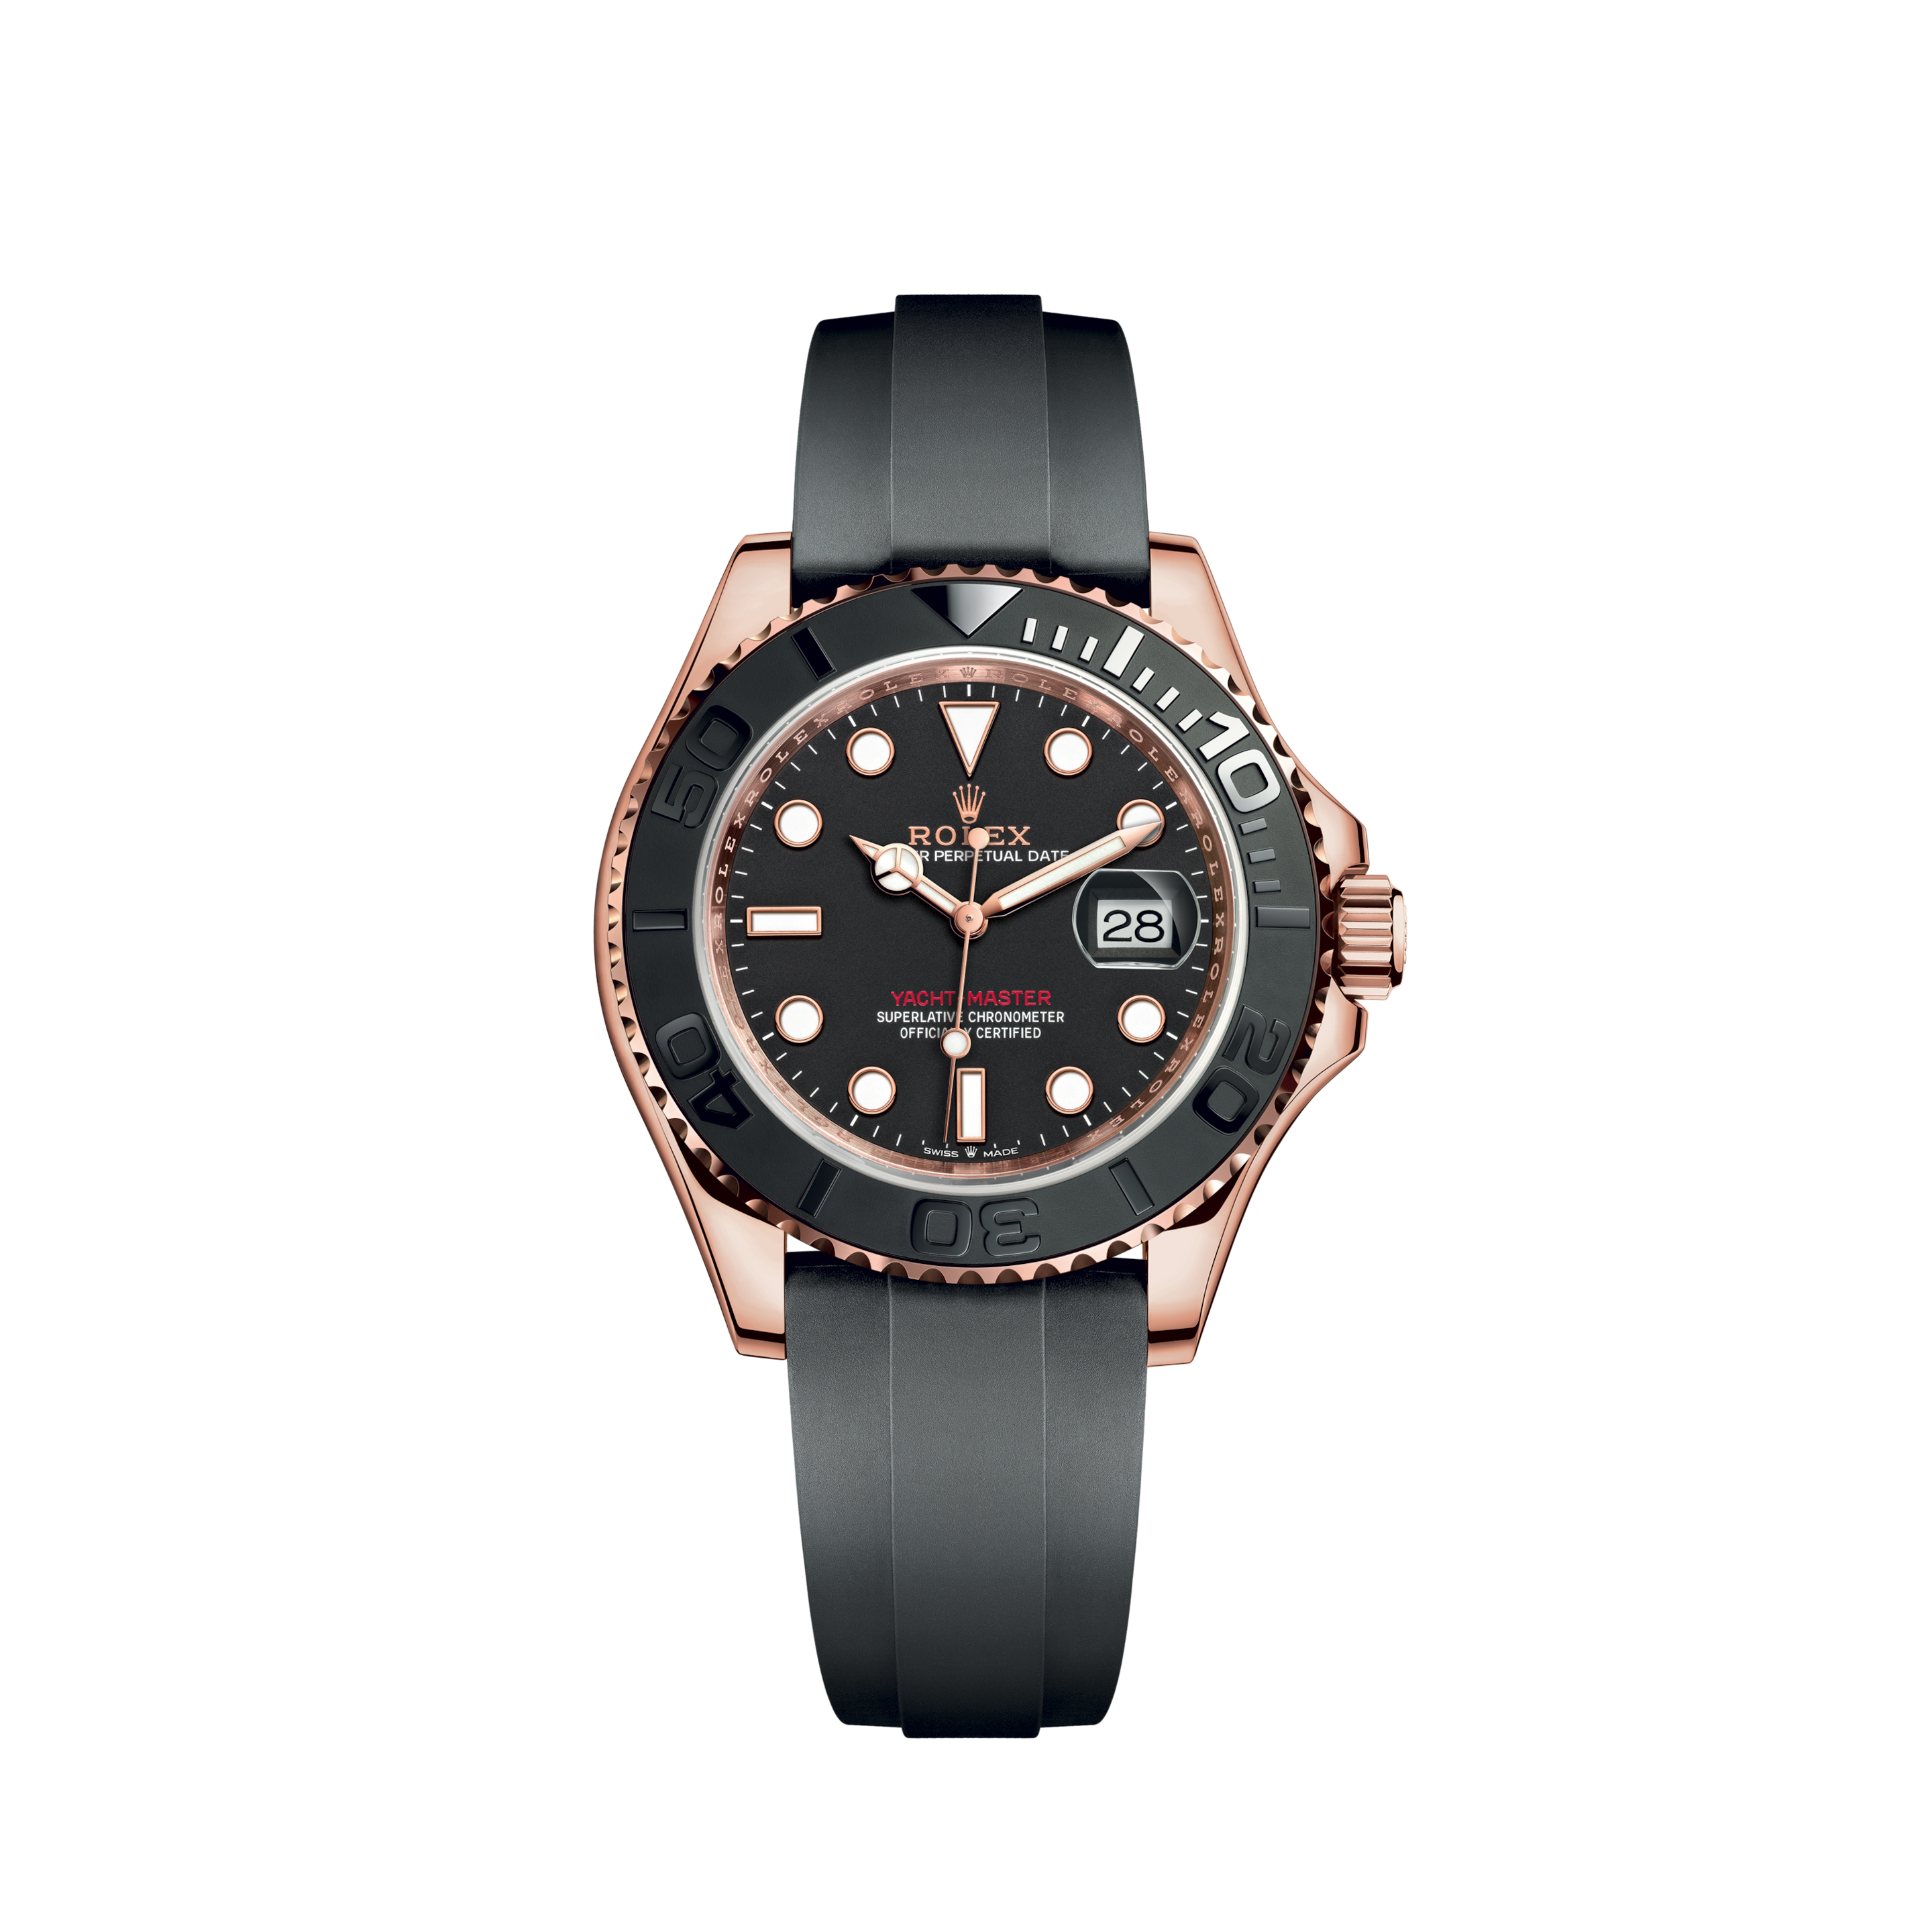 Rolex | Submariner Date 18kt Yellow Gold, ref.16808, Tropical Champagne DialRolex | Submariner Date, 18kt Yellow Gold, Ref. 16618, Purple Dial, from year 1993, with Service Rolex